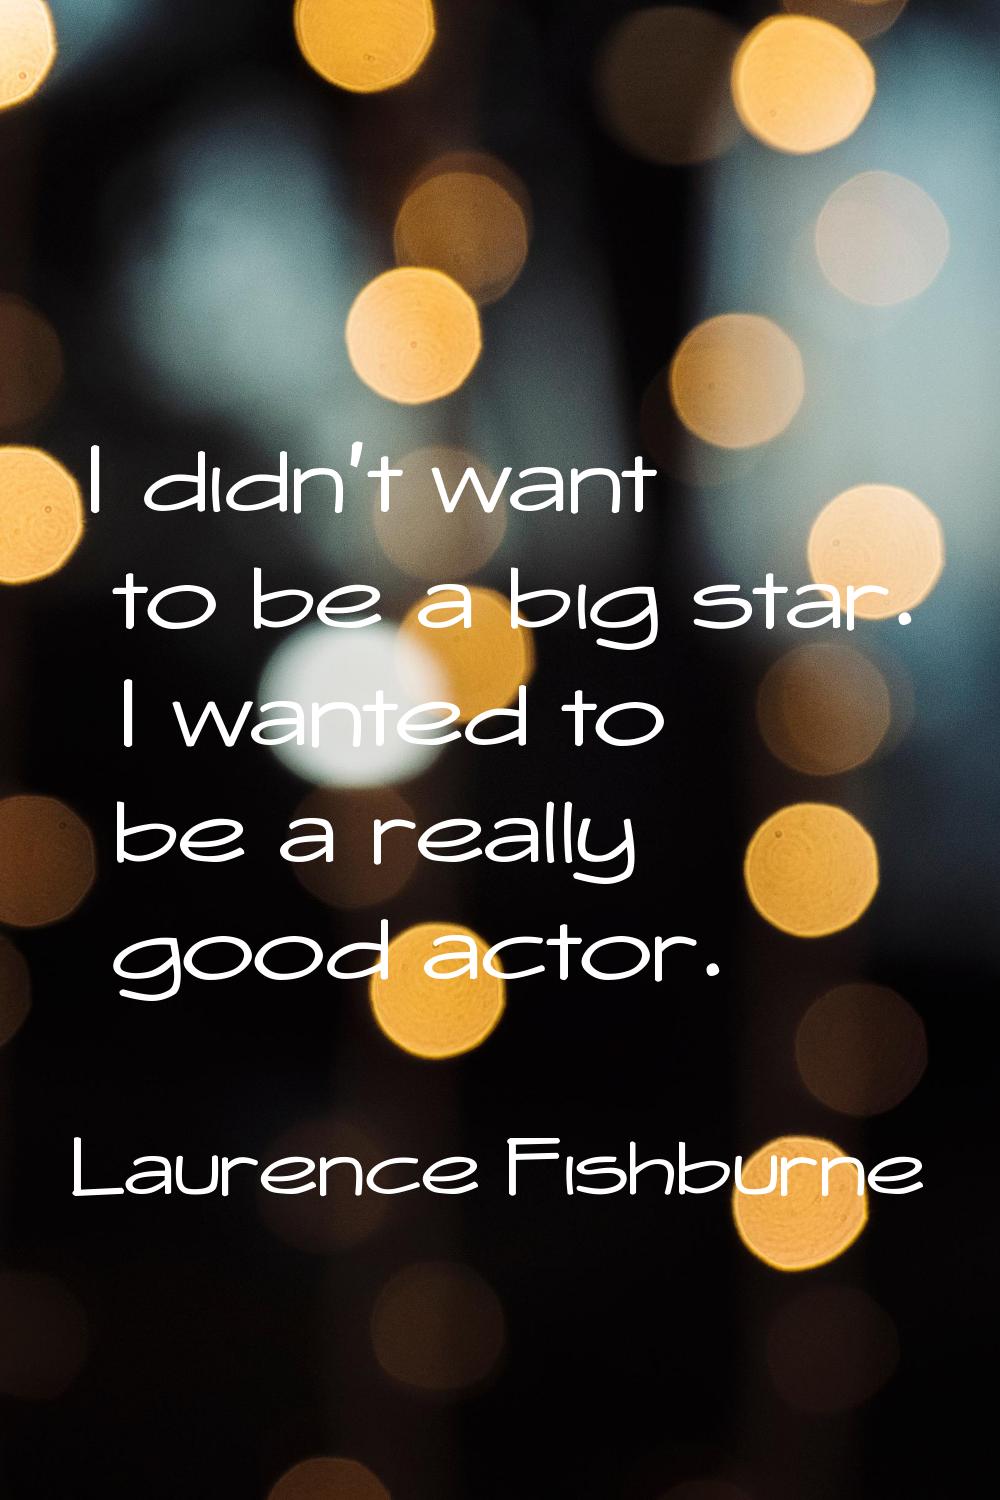 I didn't want to be a big star. I wanted to be a really good actor.